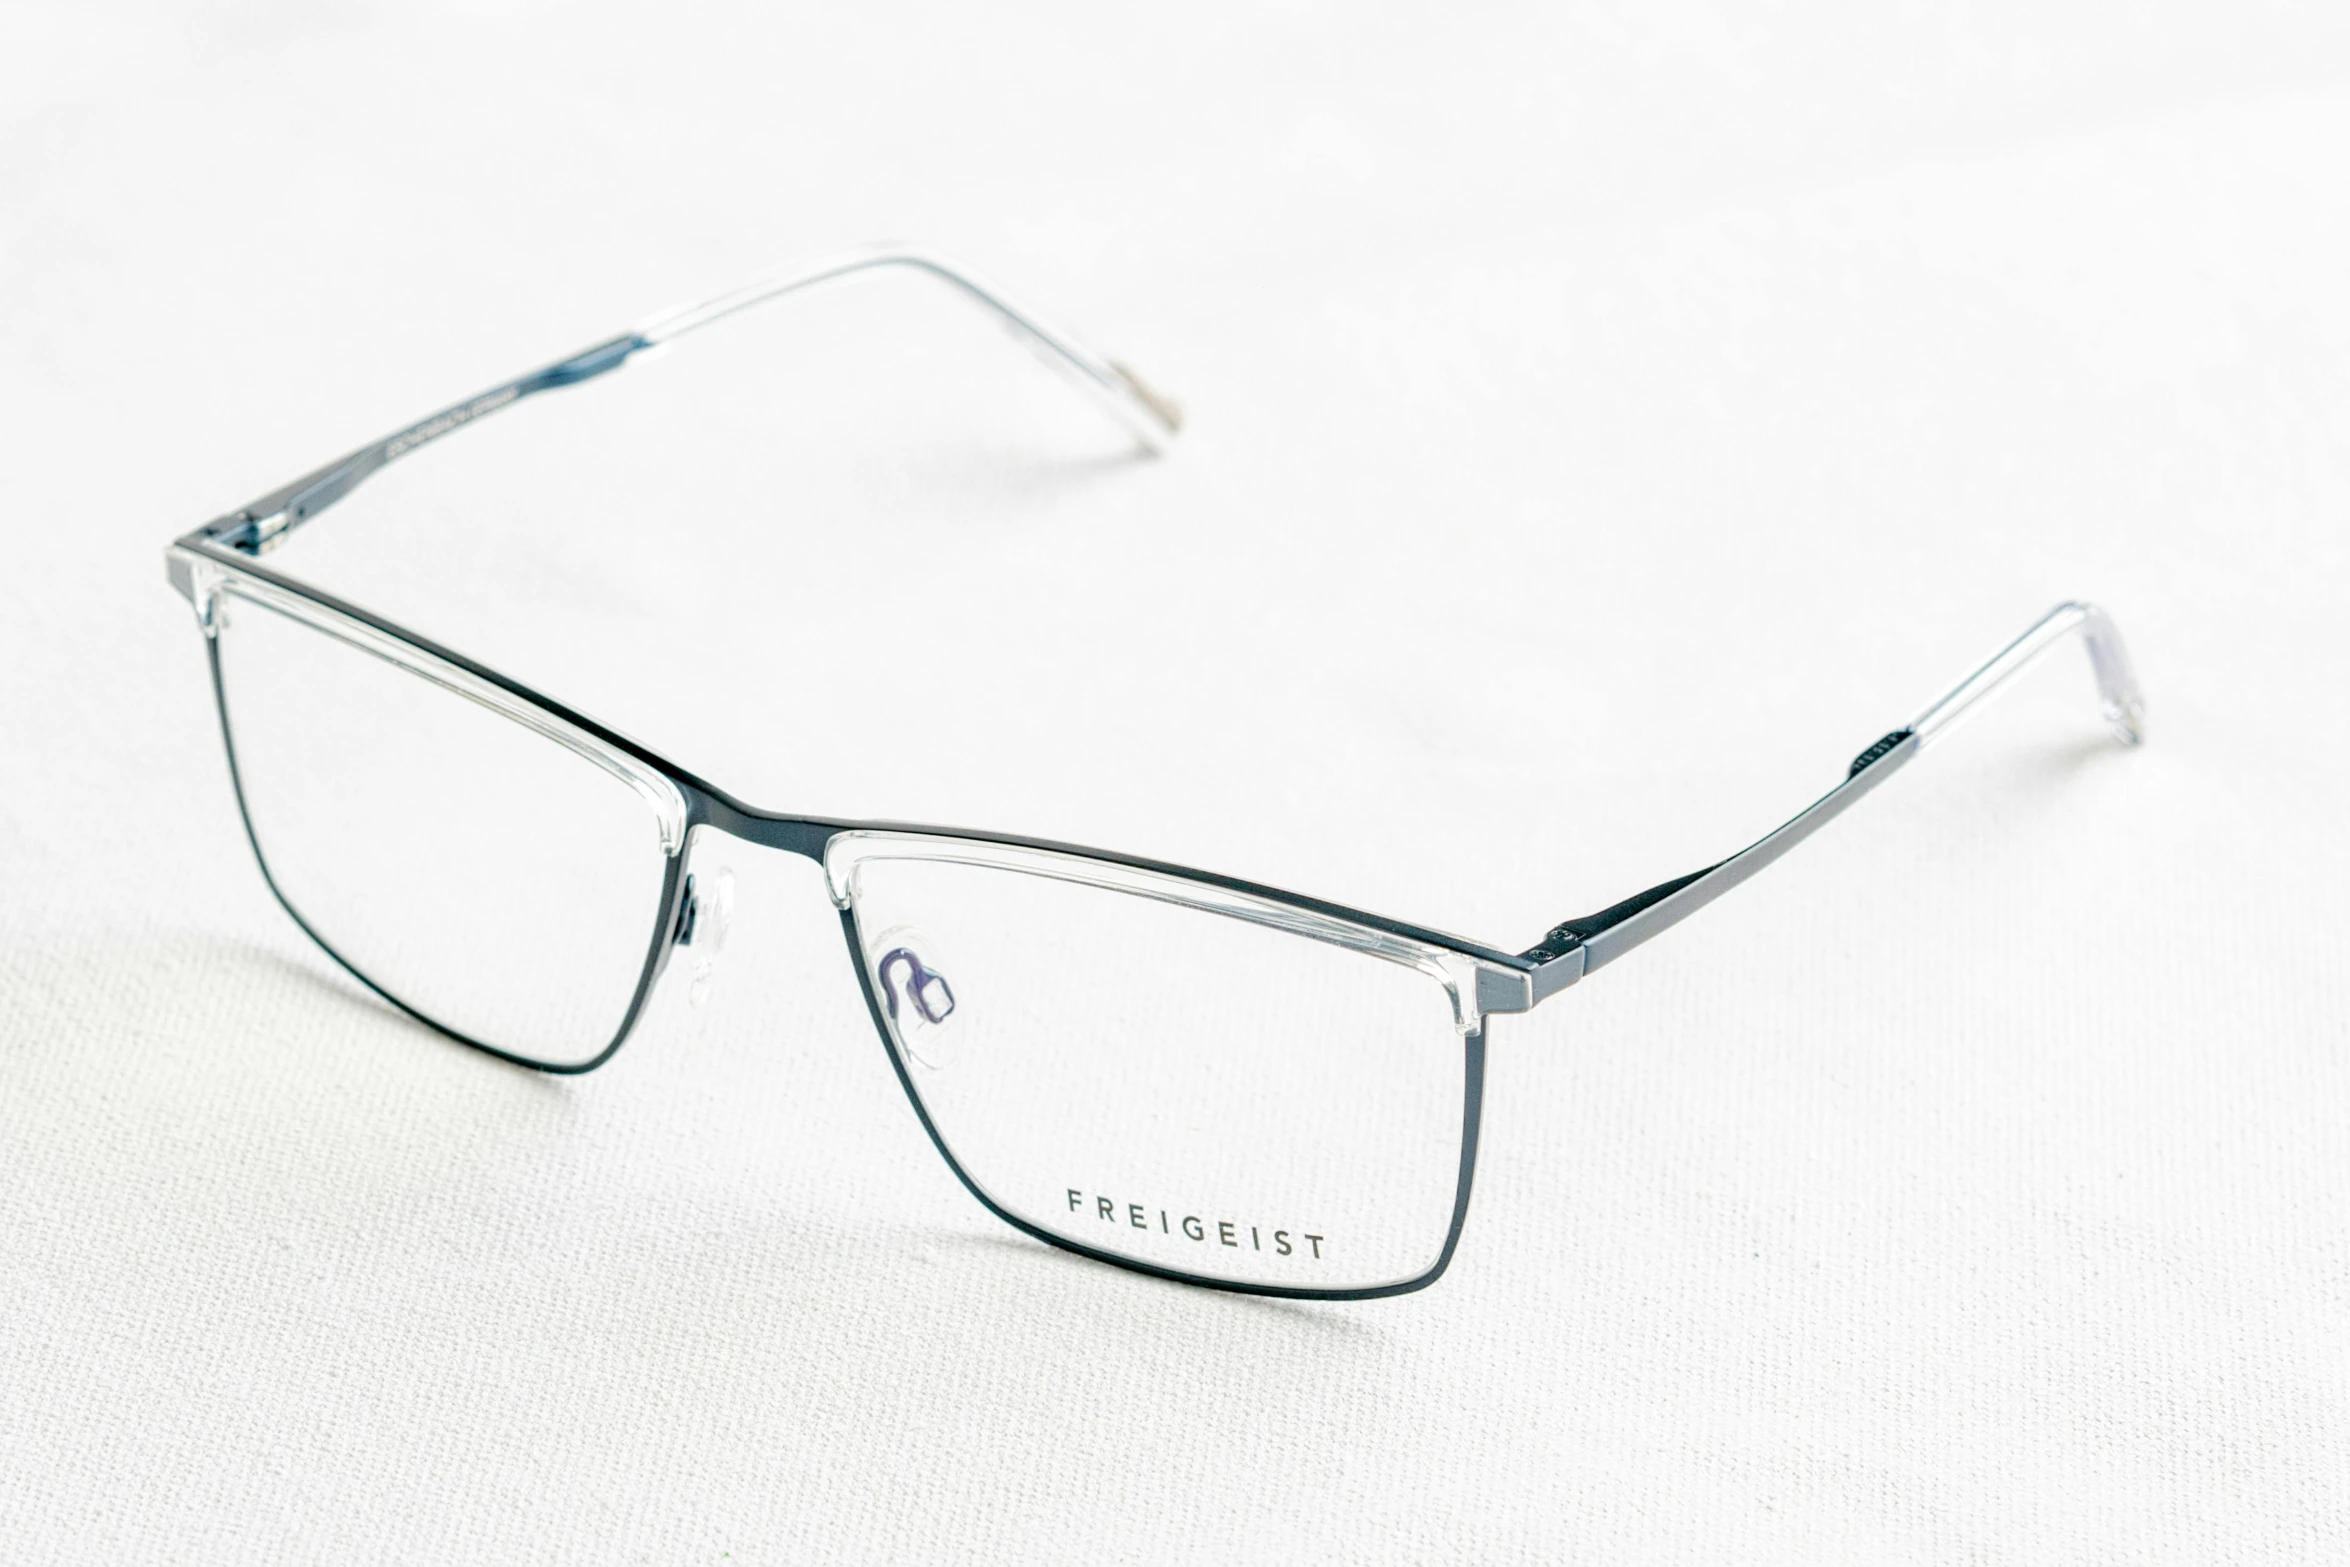 a pair of reading glasses is displayed on a white background